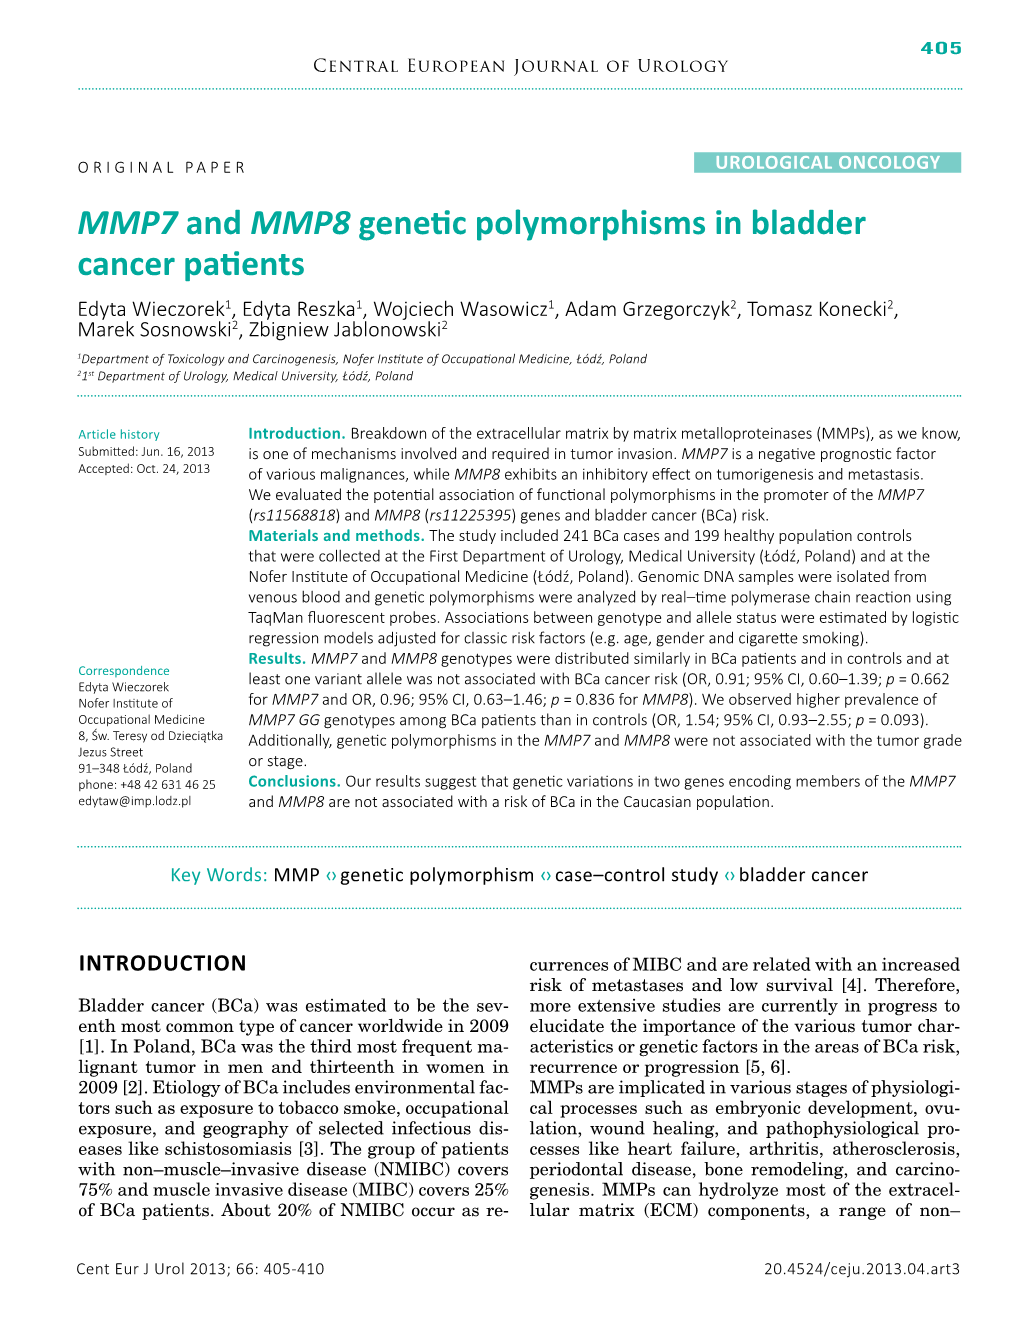 MMP7 and MMP8 Genetic Polymorphisms in Bladder Cancer